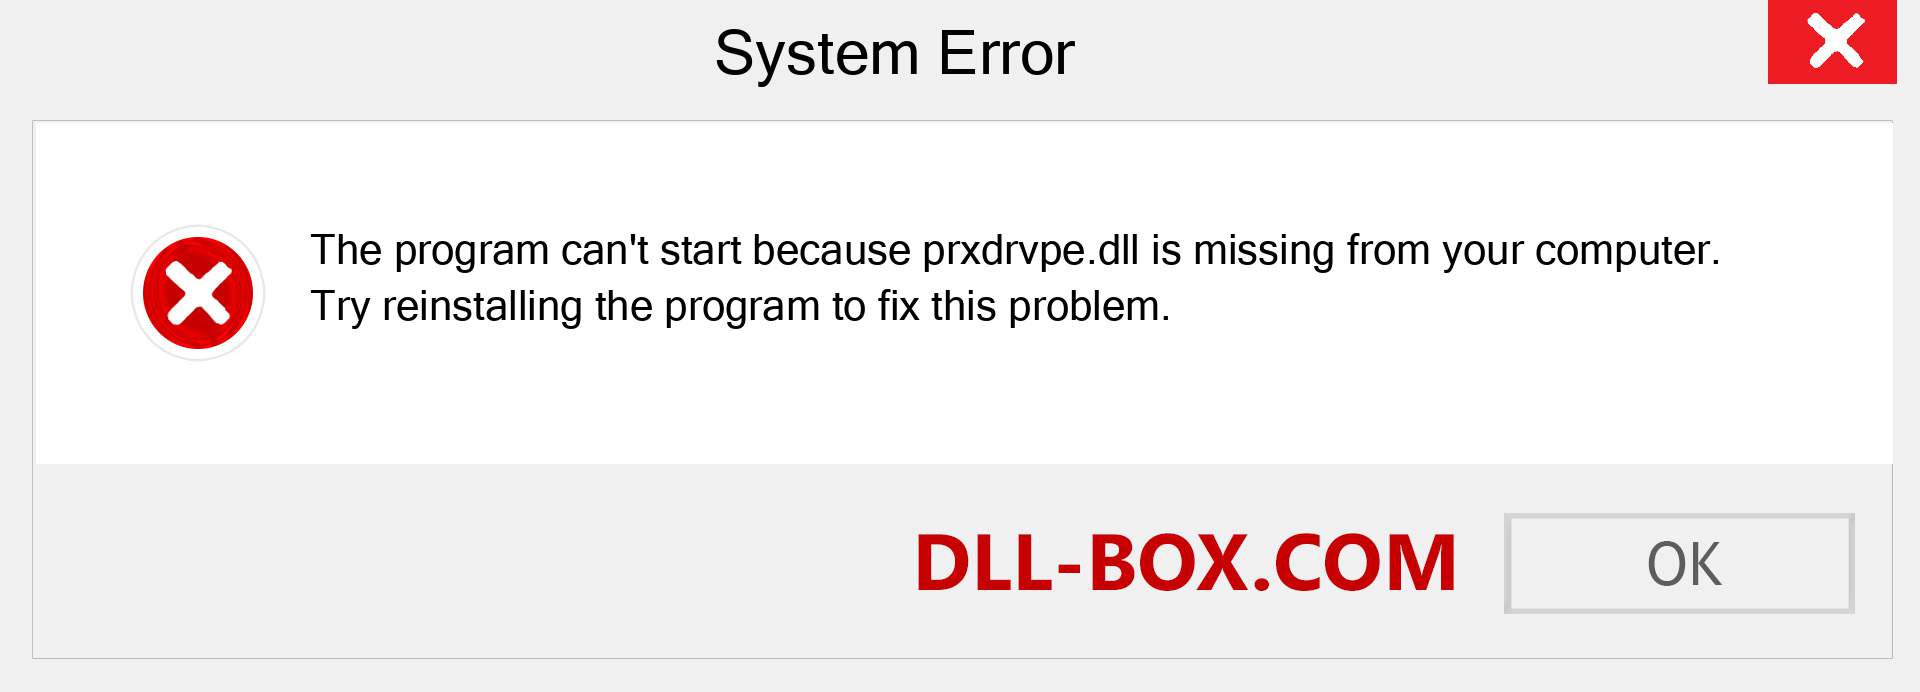  prxdrvpe.dll file is missing?. Download for Windows 7, 8, 10 - Fix  prxdrvpe dll Missing Error on Windows, photos, images